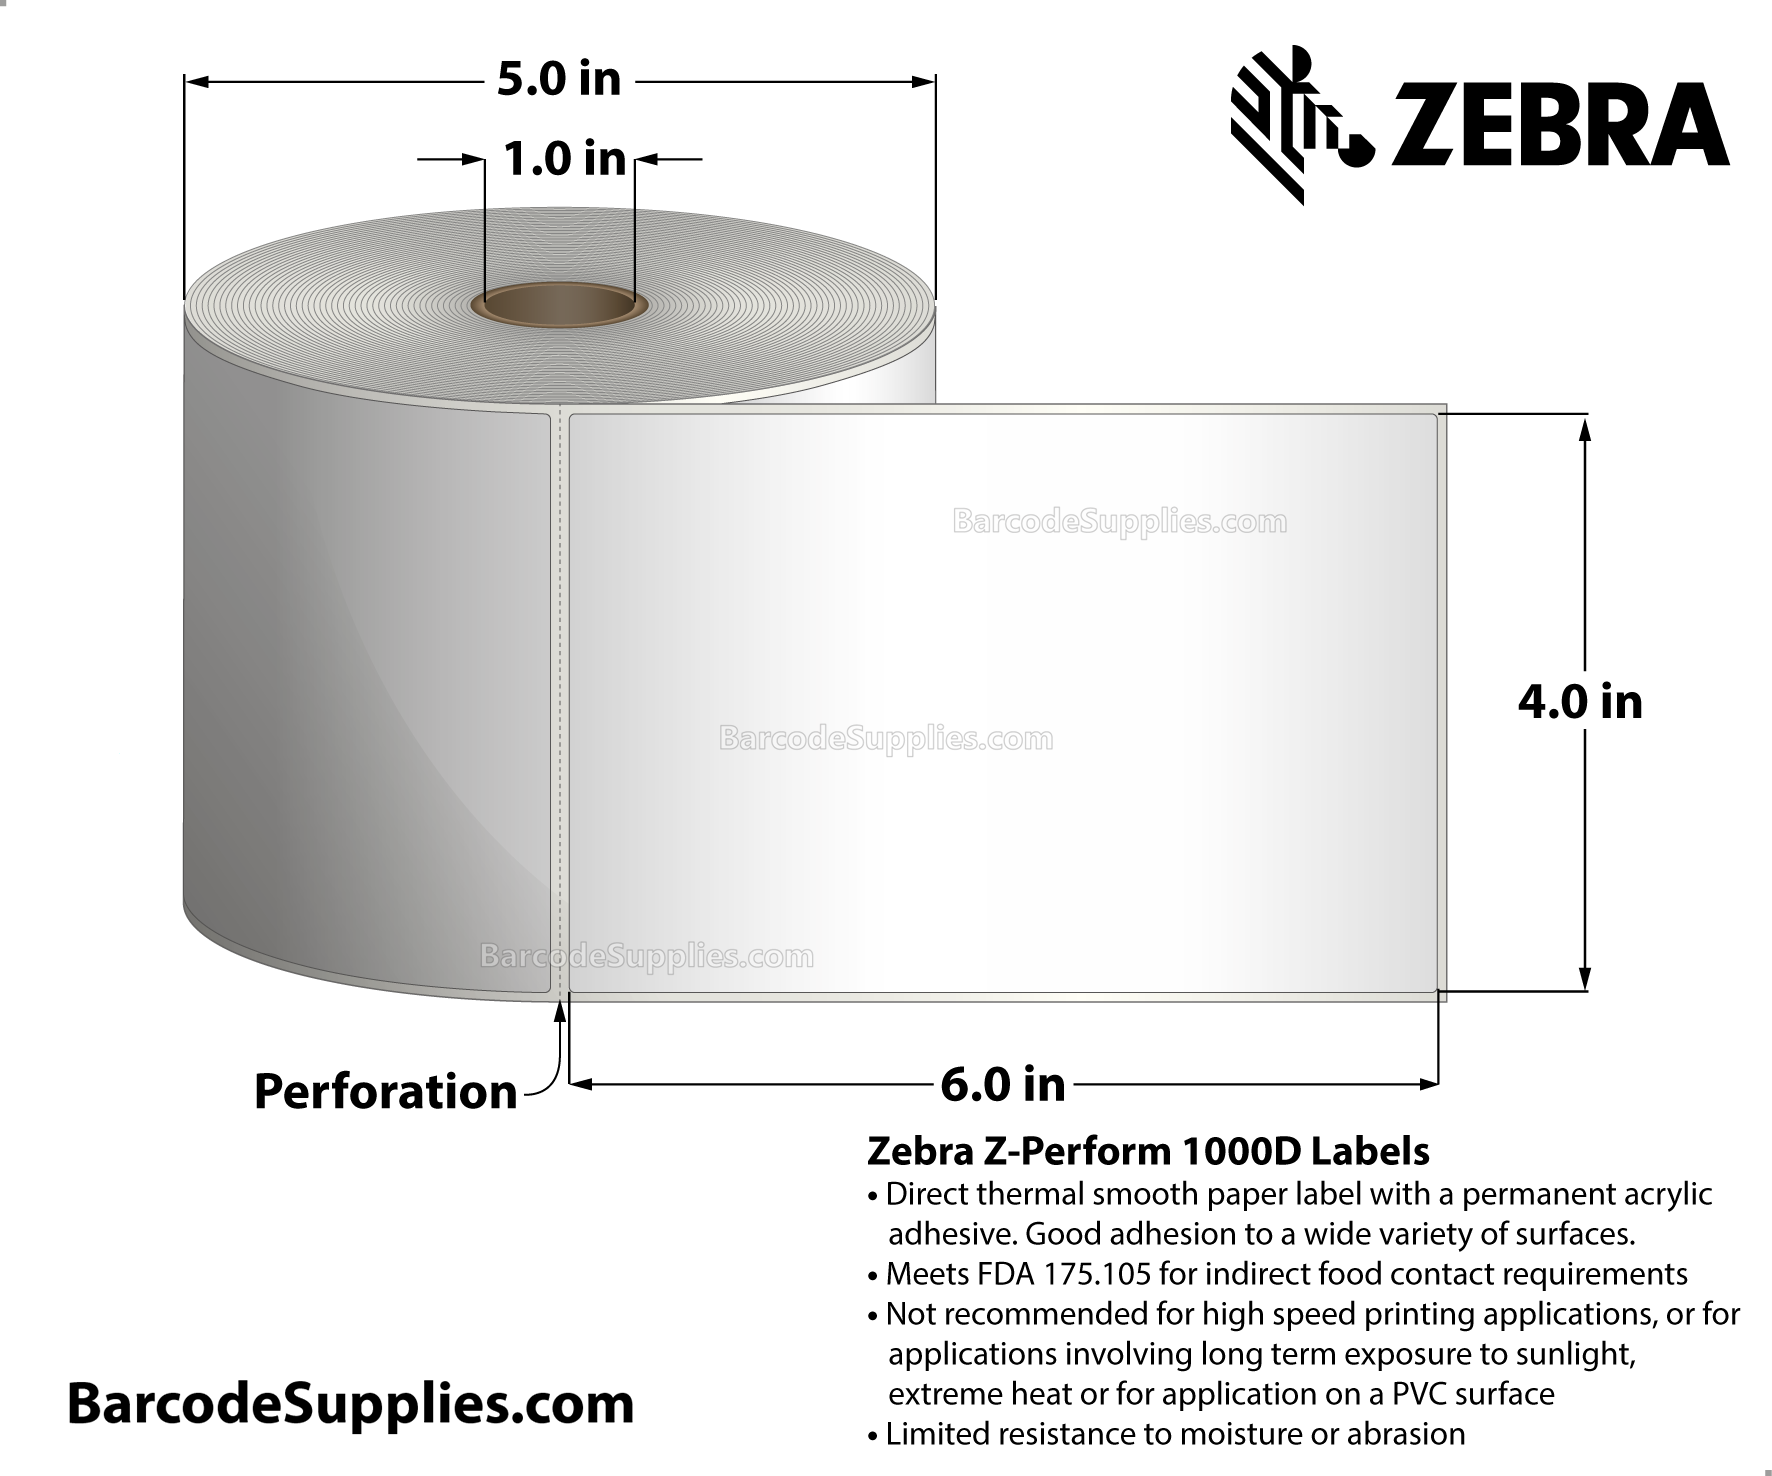 4 x 6 Direct Thermal White Z-Perform 1000D Labels With Permanent Adhesive - Perforated - 430 Labels Per Roll - Carton Of 6 Rolls - 2580 Labels Total - MPN: 10026382